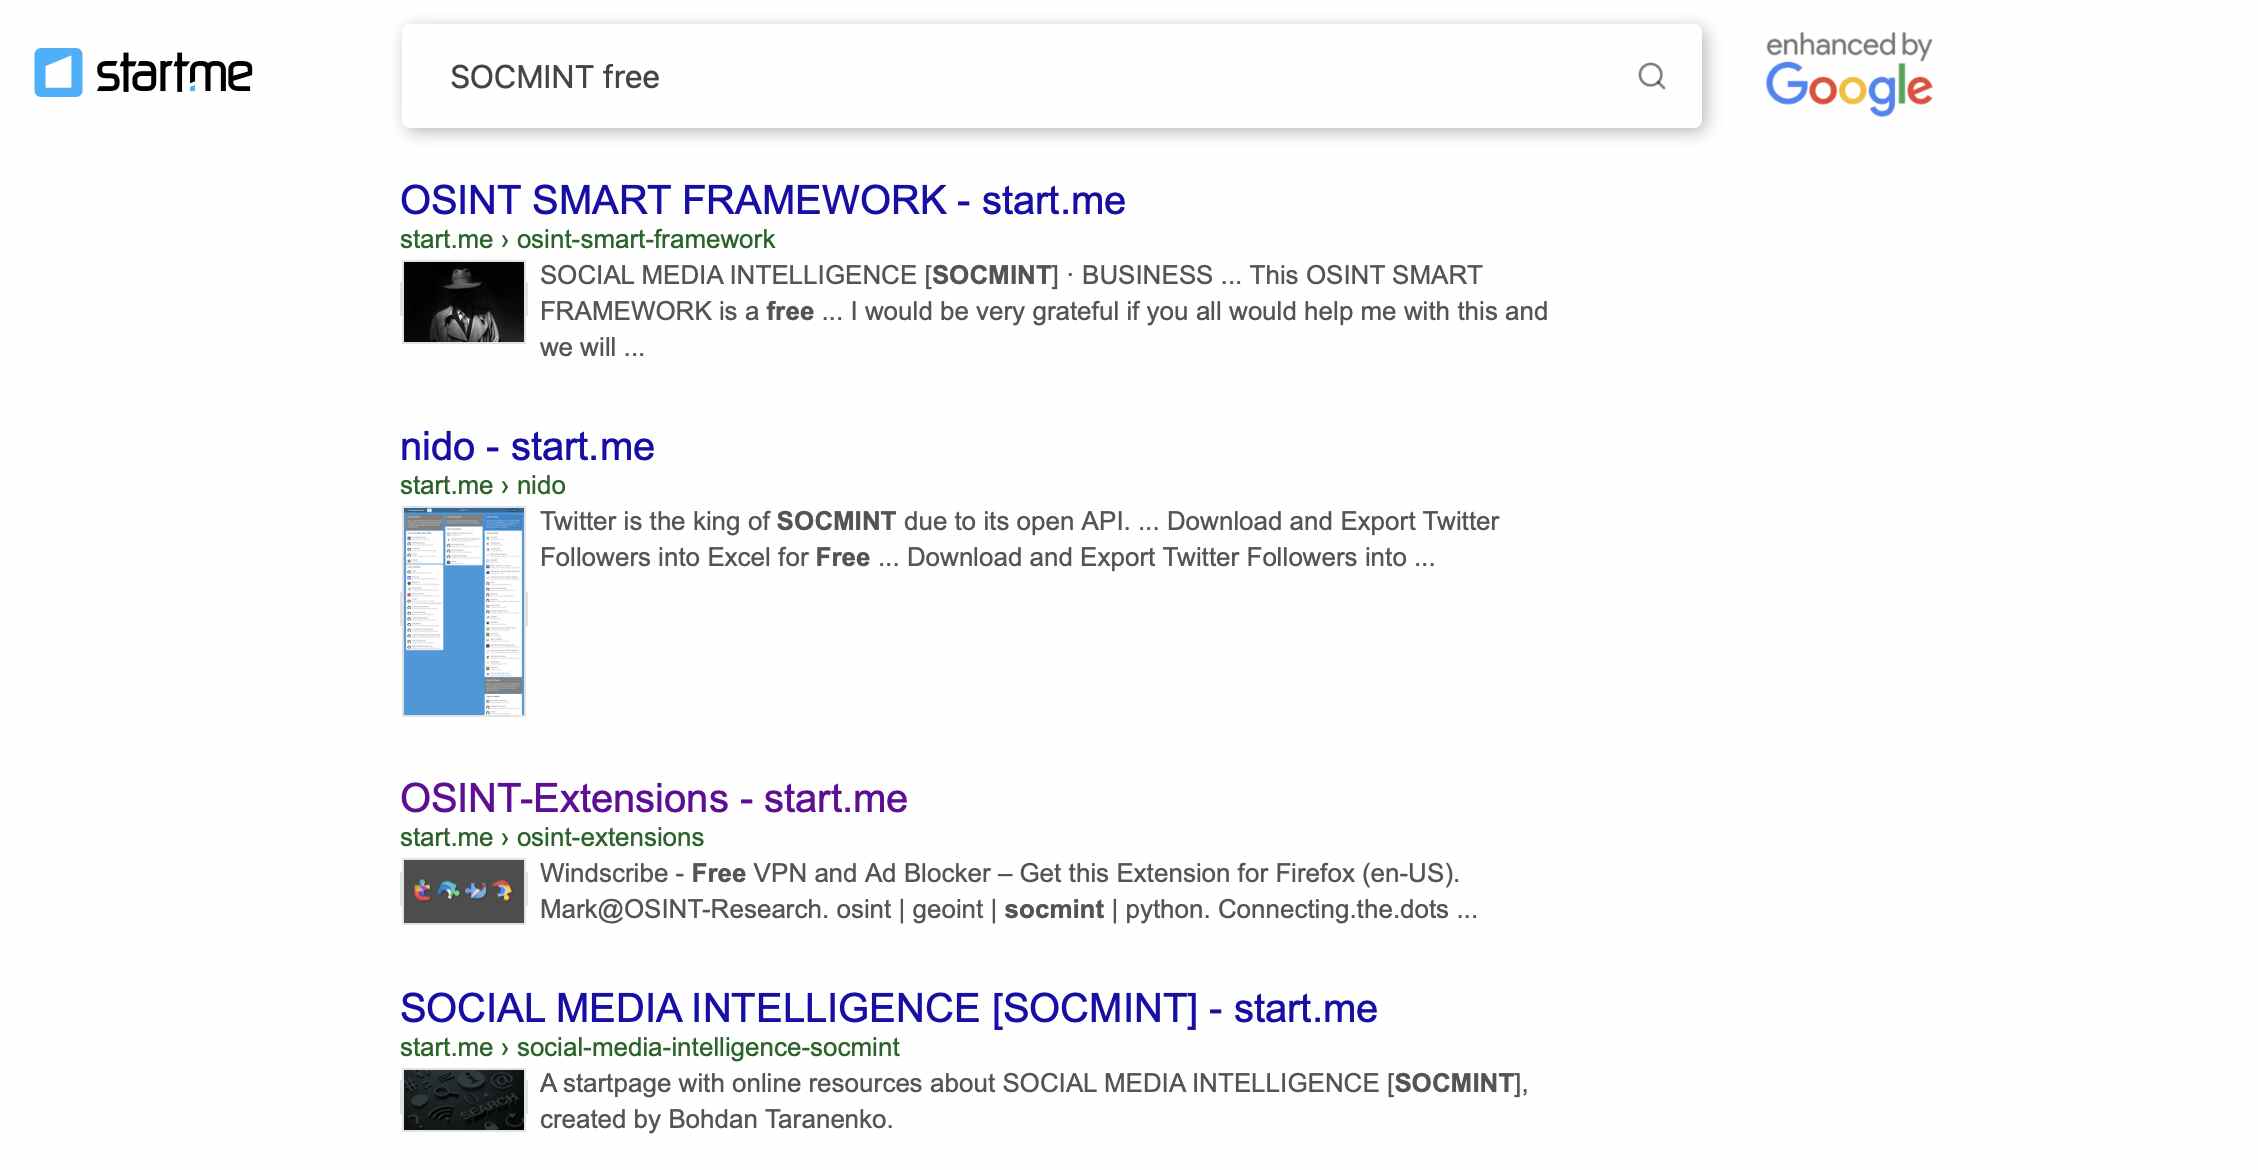 searching for tool start.me using native search capabilities